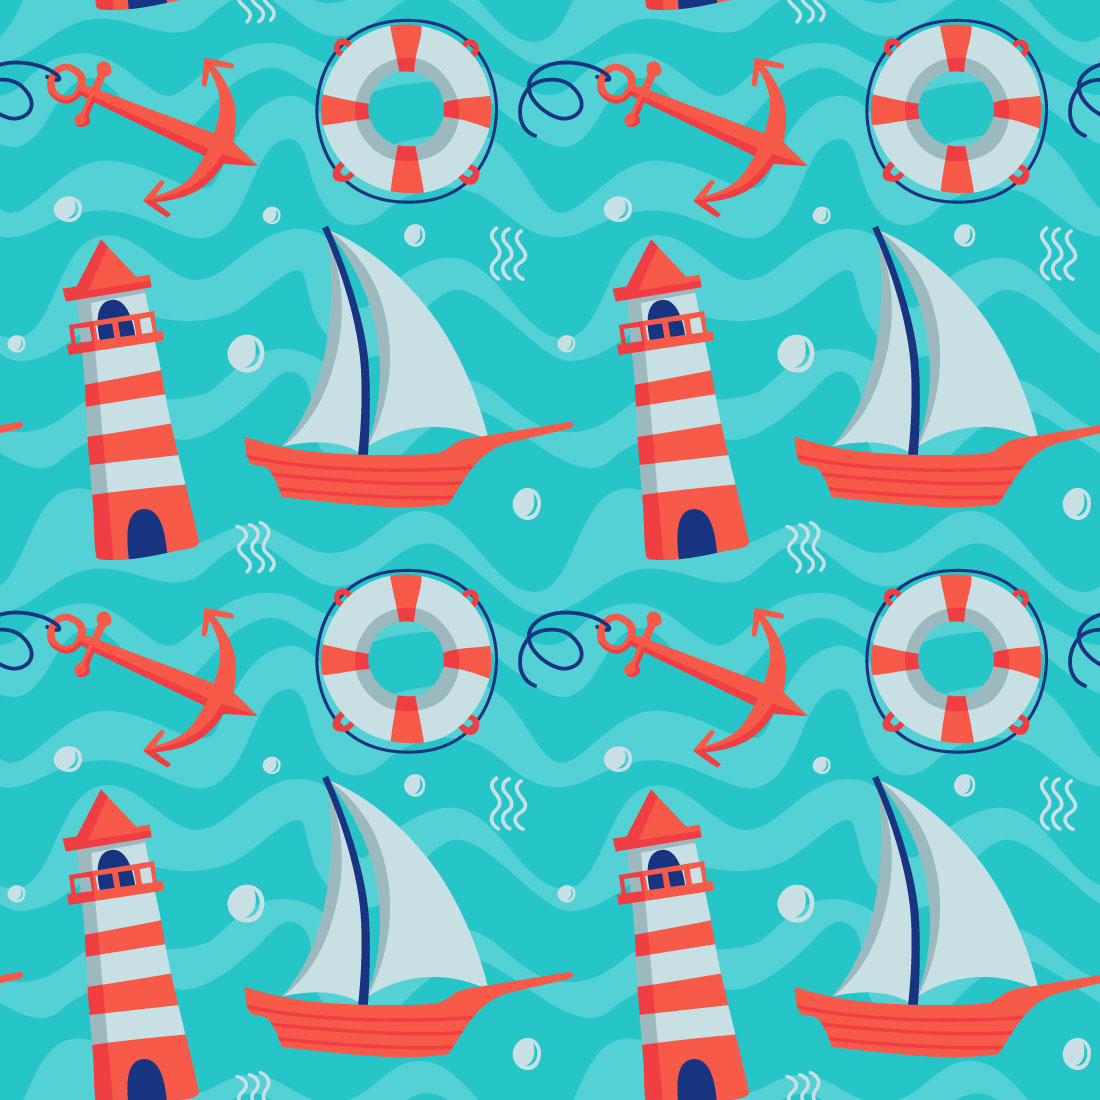 Nautical Seamless Pattern cover image.